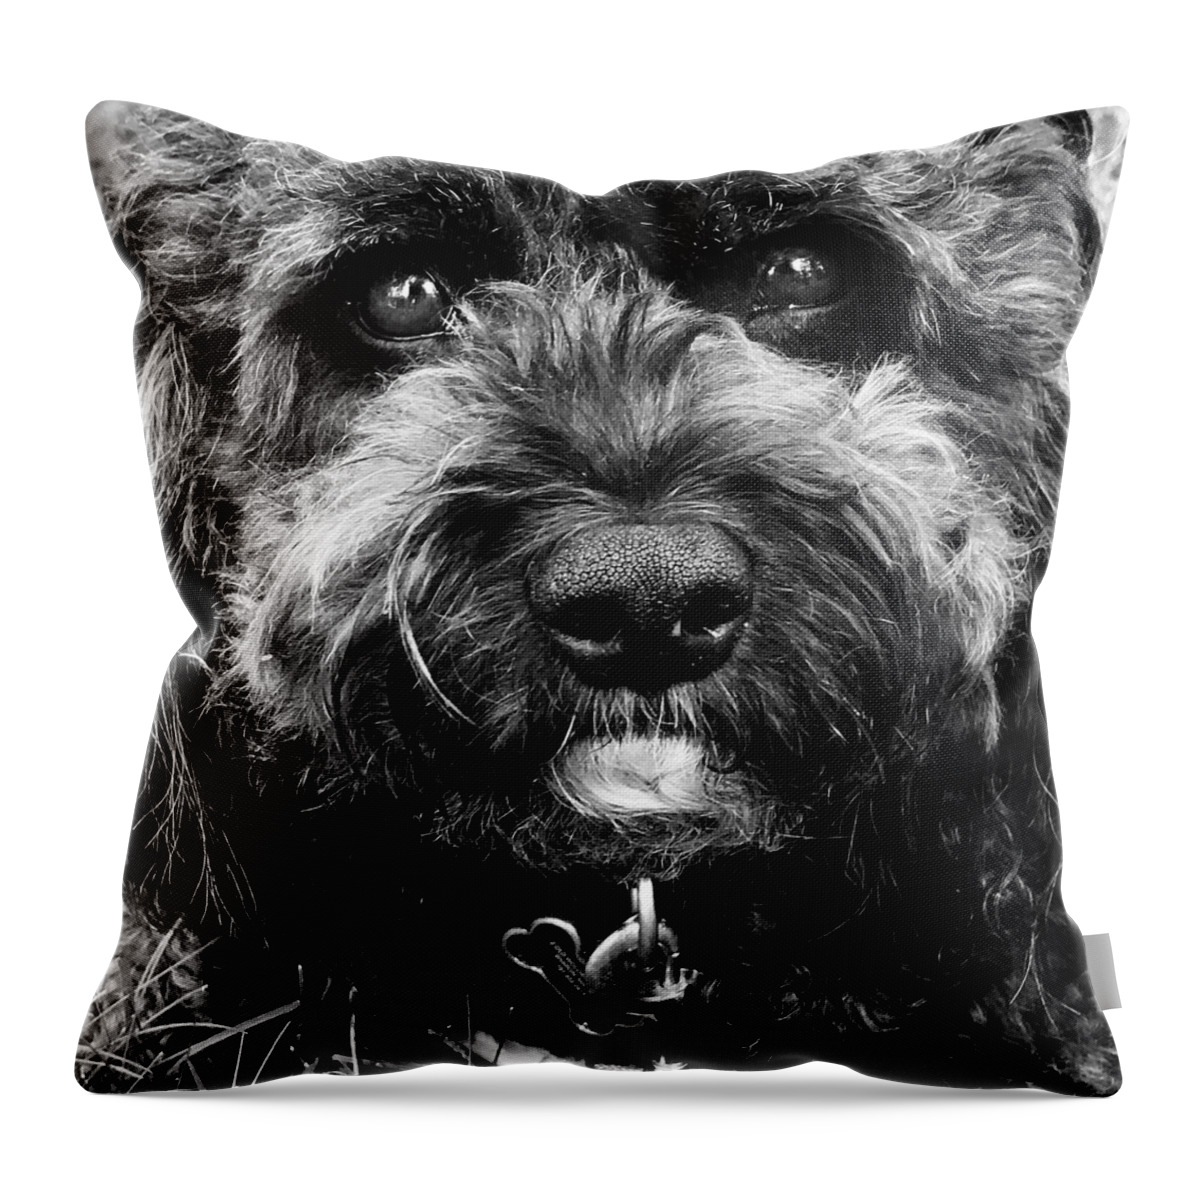  Throw Pillow featuring the digital art Cutest Dog on the Planet by Cindy Greenstein